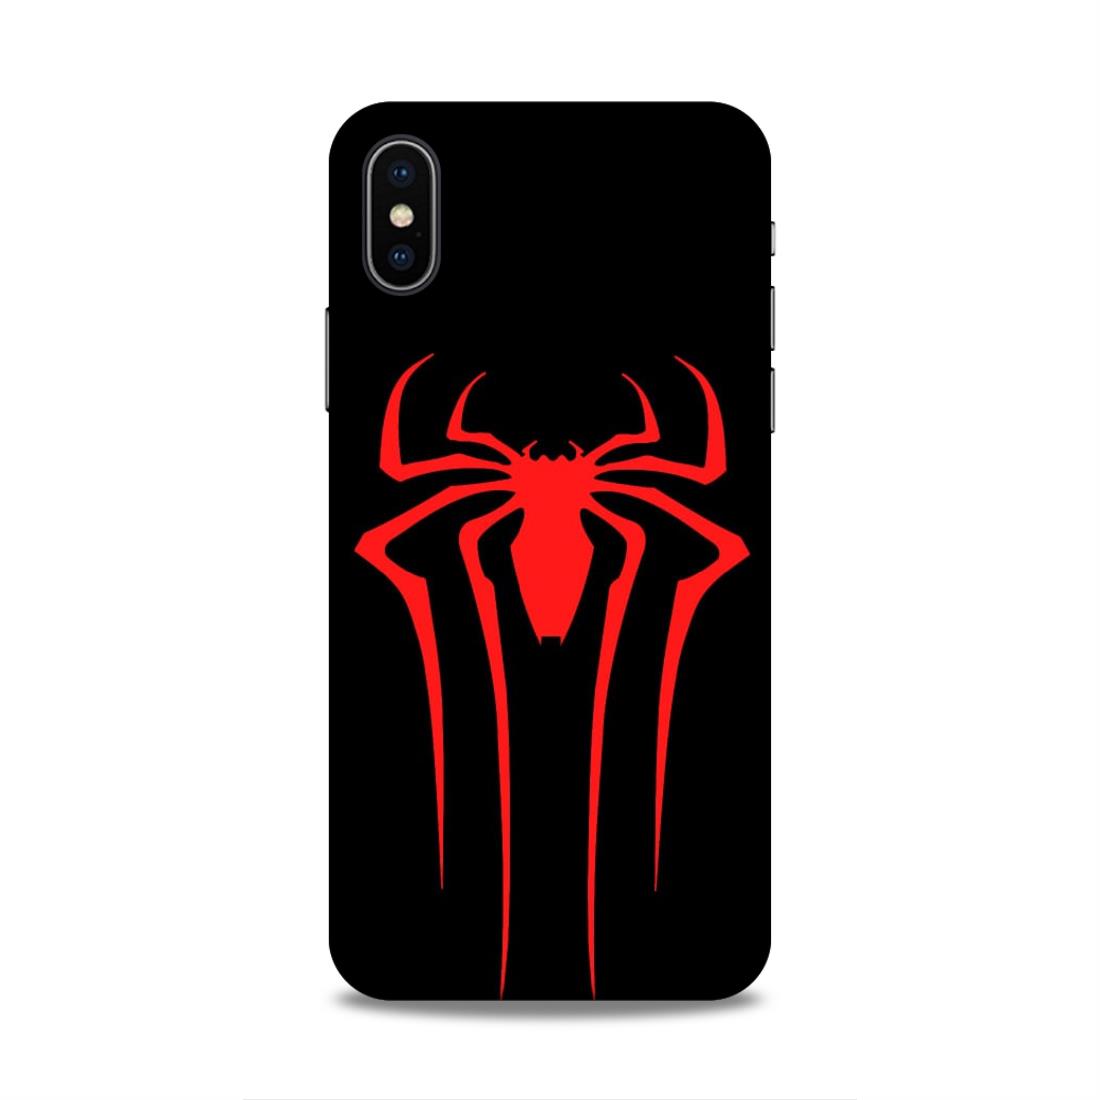 Spiderman Symbol Hard Back Case For Apple iPhone X/XS